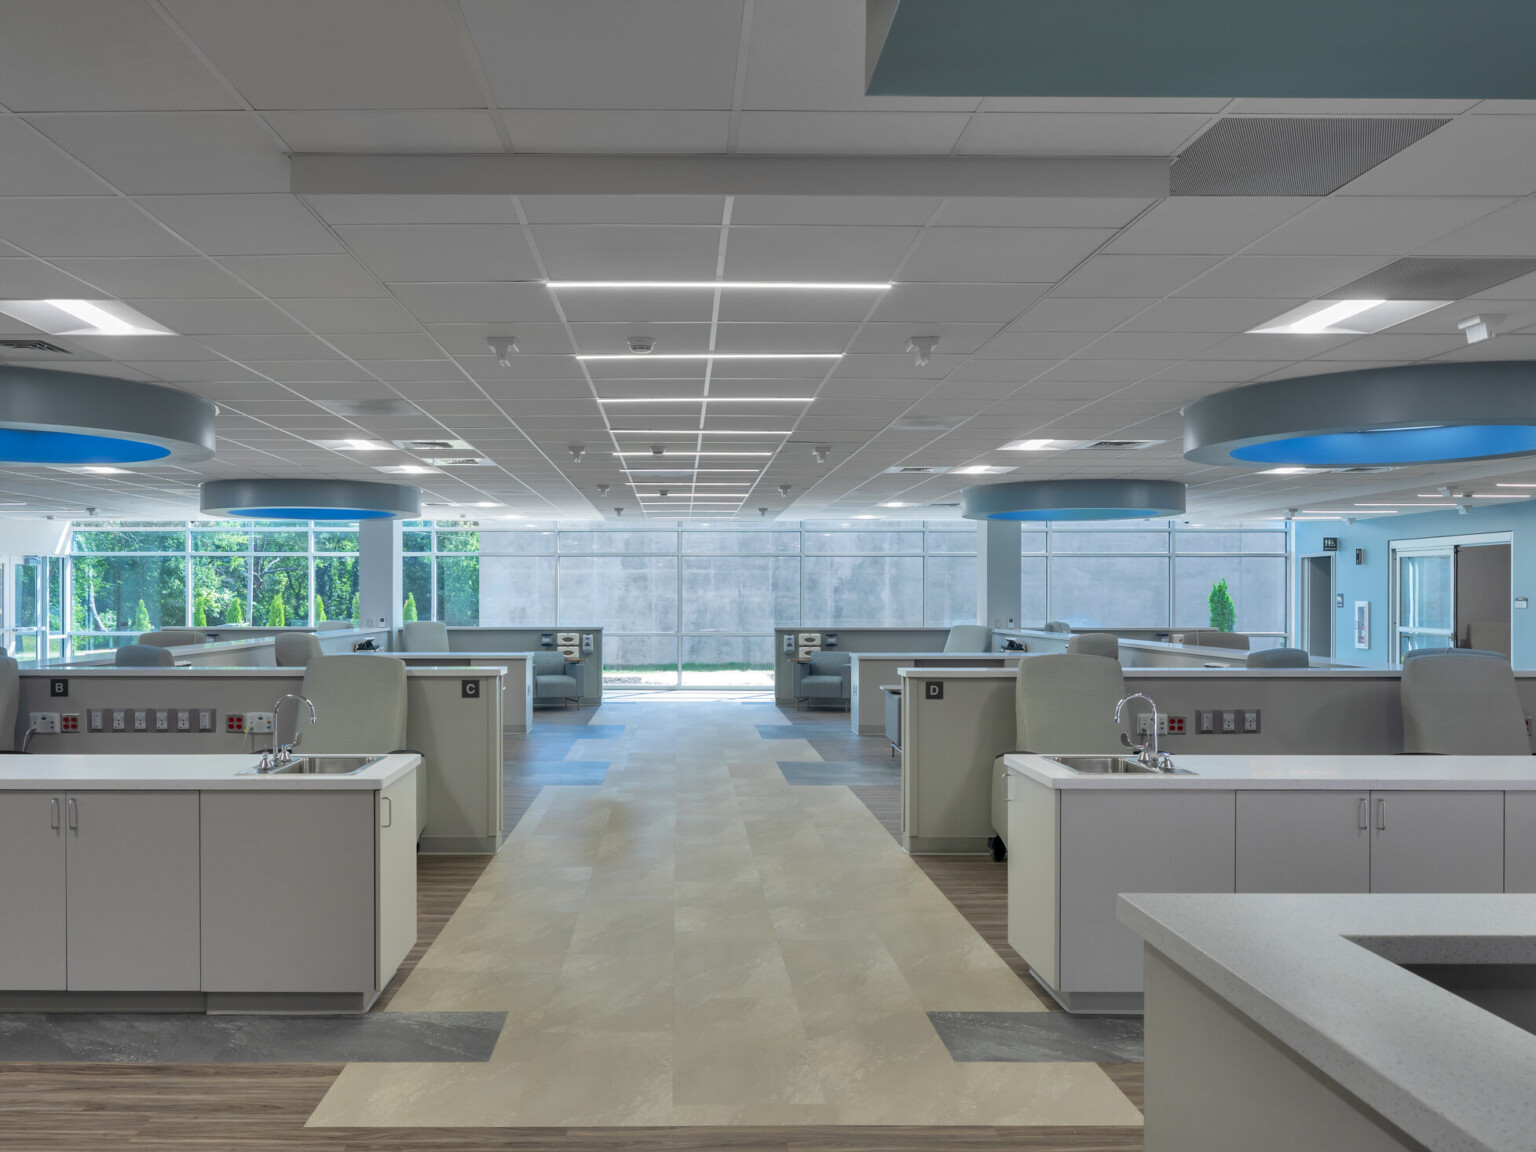 Medical office with rows of chairs with countertops and sinks with round lighting with blue glow